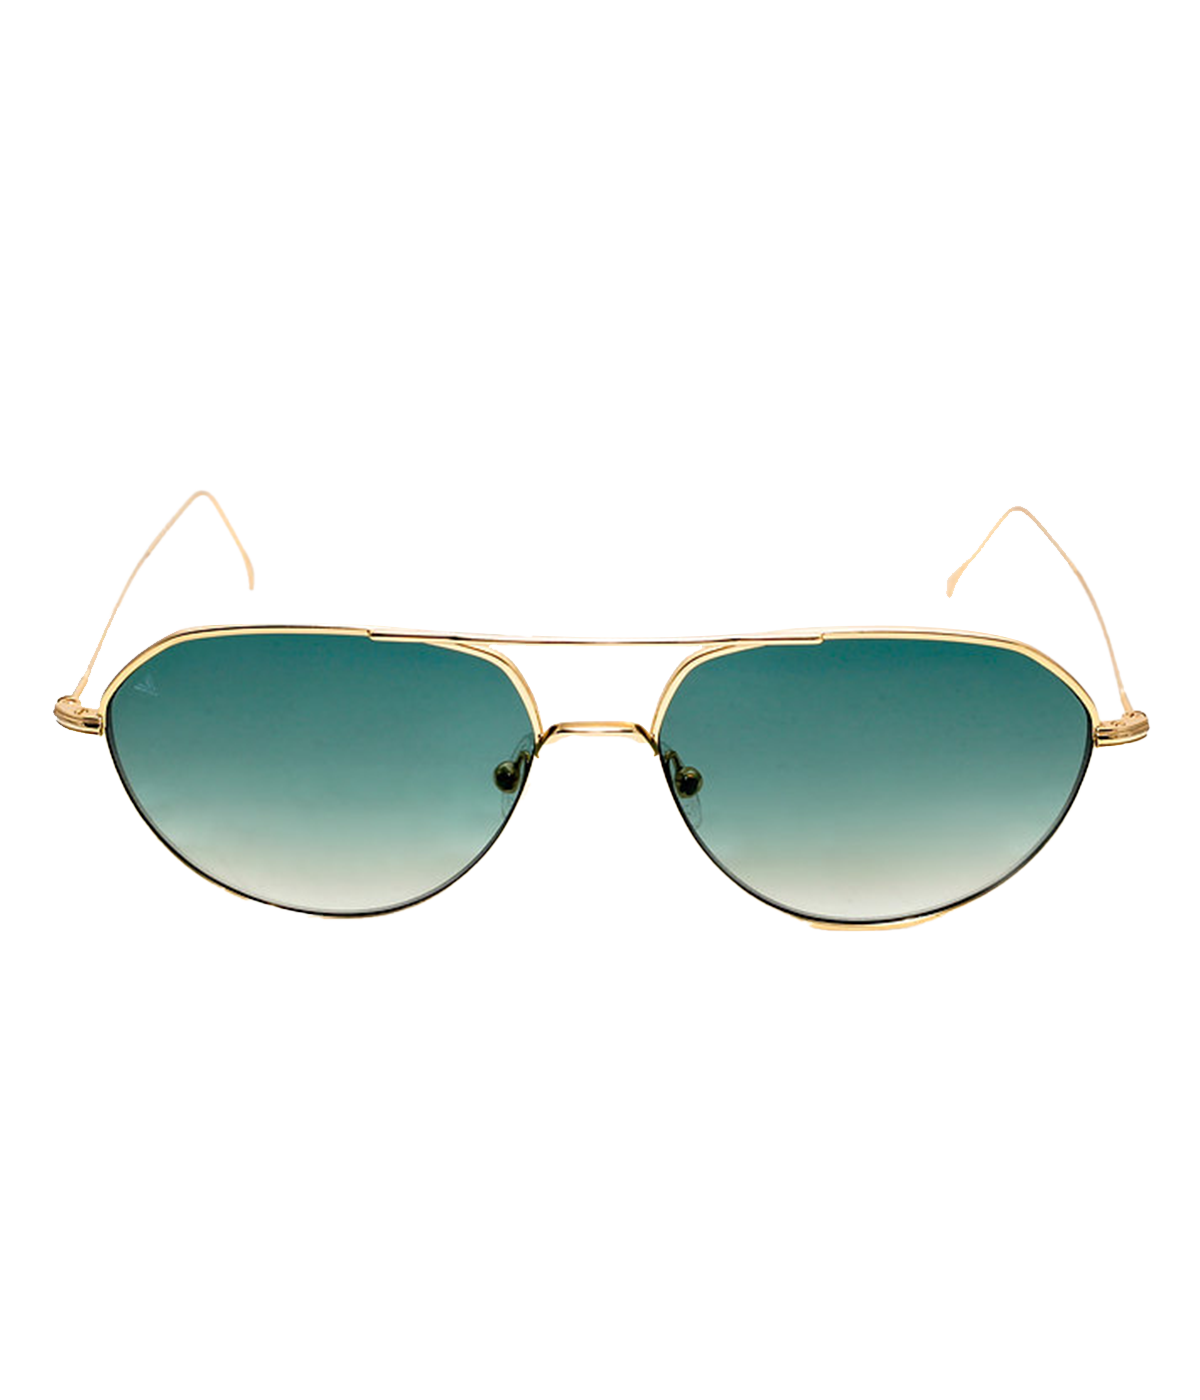 Image of a double bridge modern aviator shape, with gold thin metal frame and emerald green gradient lenses. 